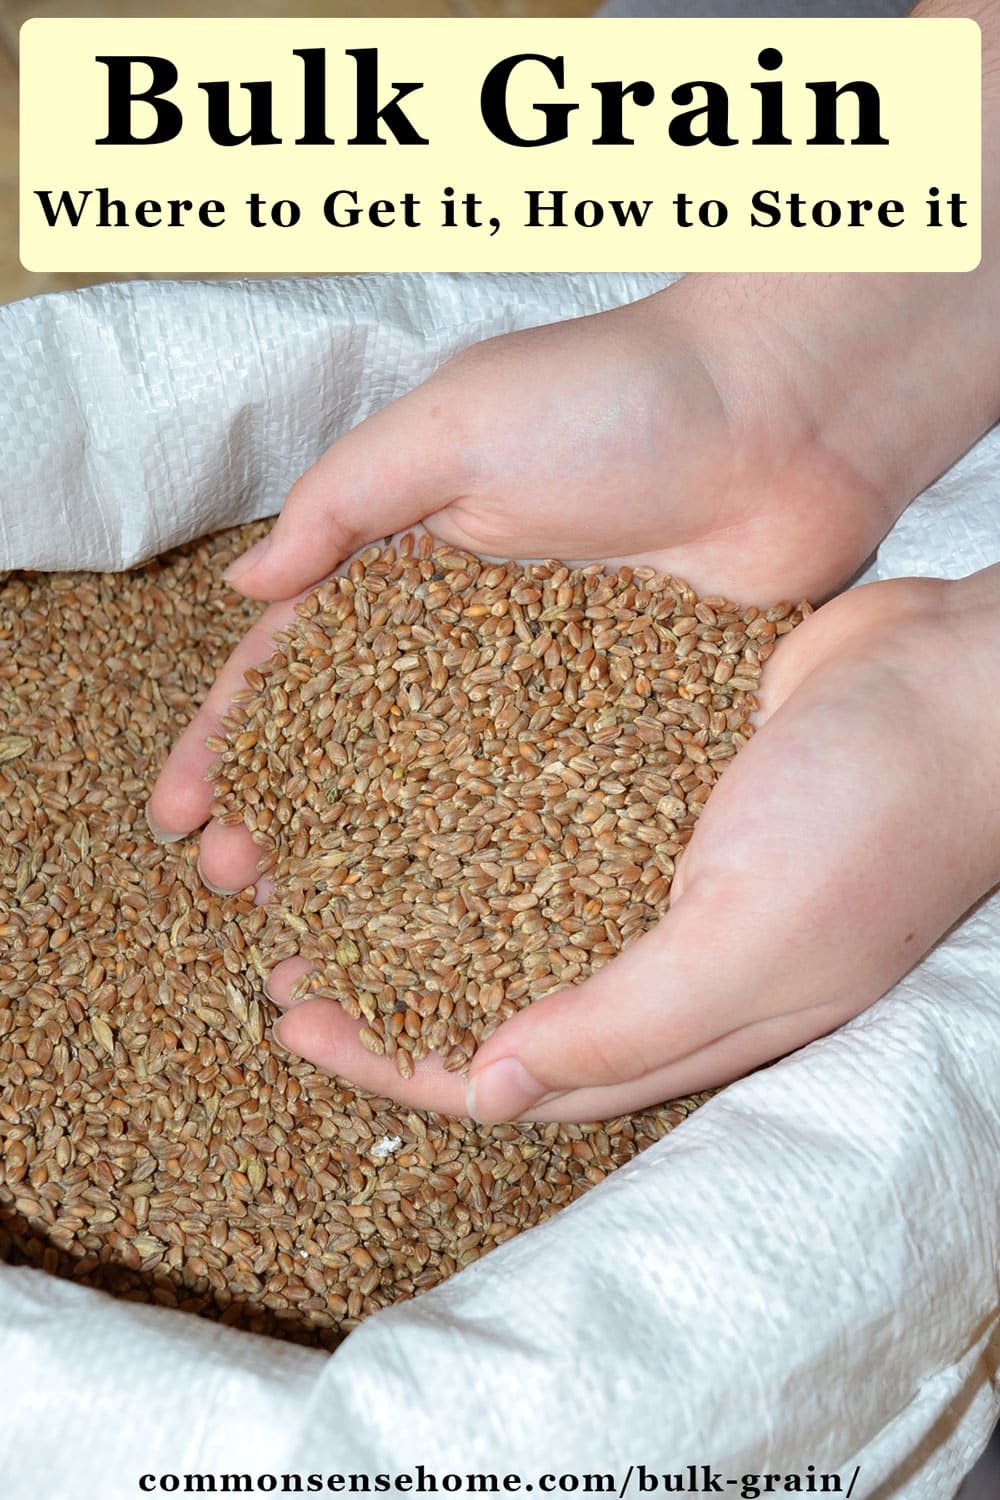 text "Bulk Grain - Where to Get it, How to Store it" with image of hands holding wheat berries